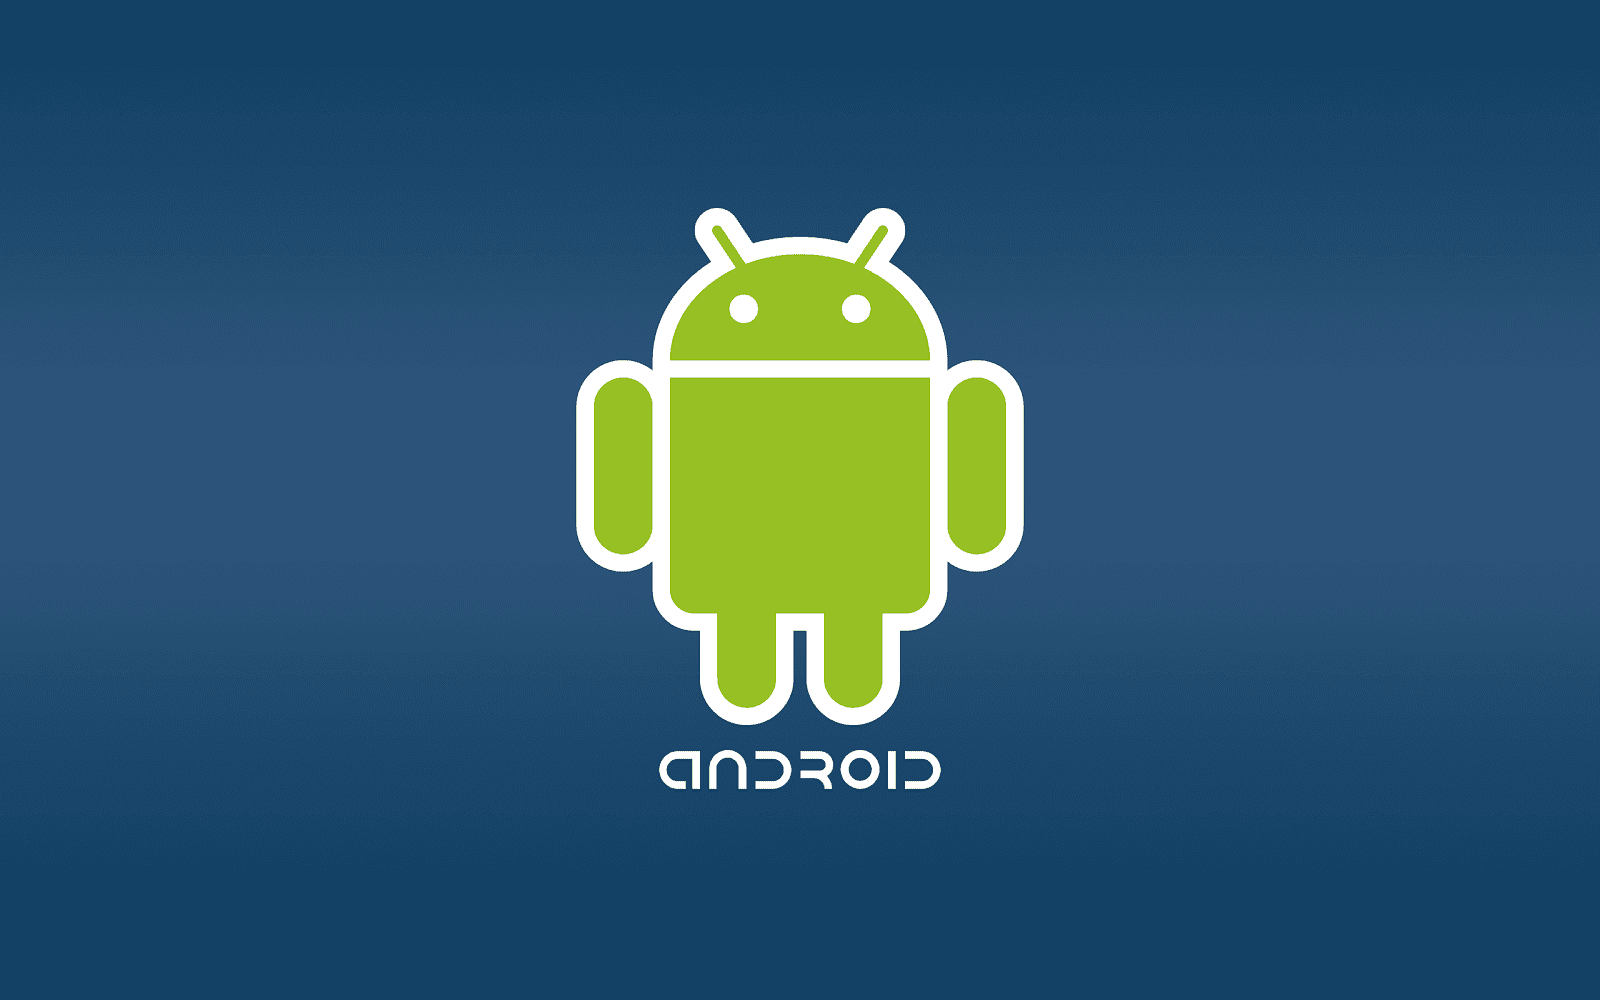 Best Android Wallpapers Free wallpapers for your Android  - high definition android wallpaper